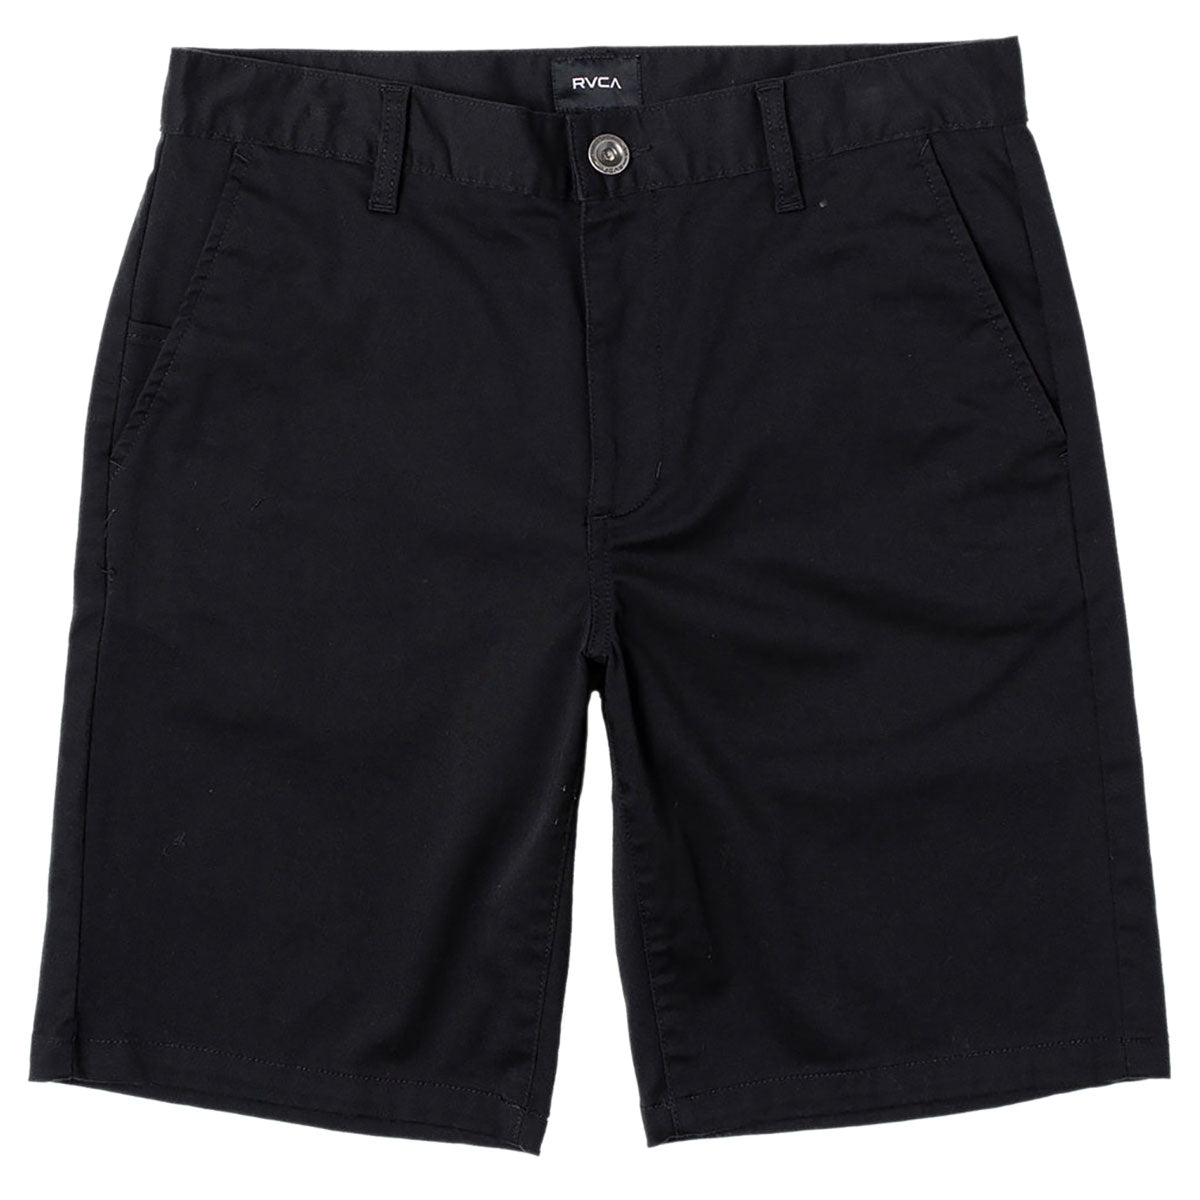 RVCA Weekend Stretch Shorts - New Black image 1